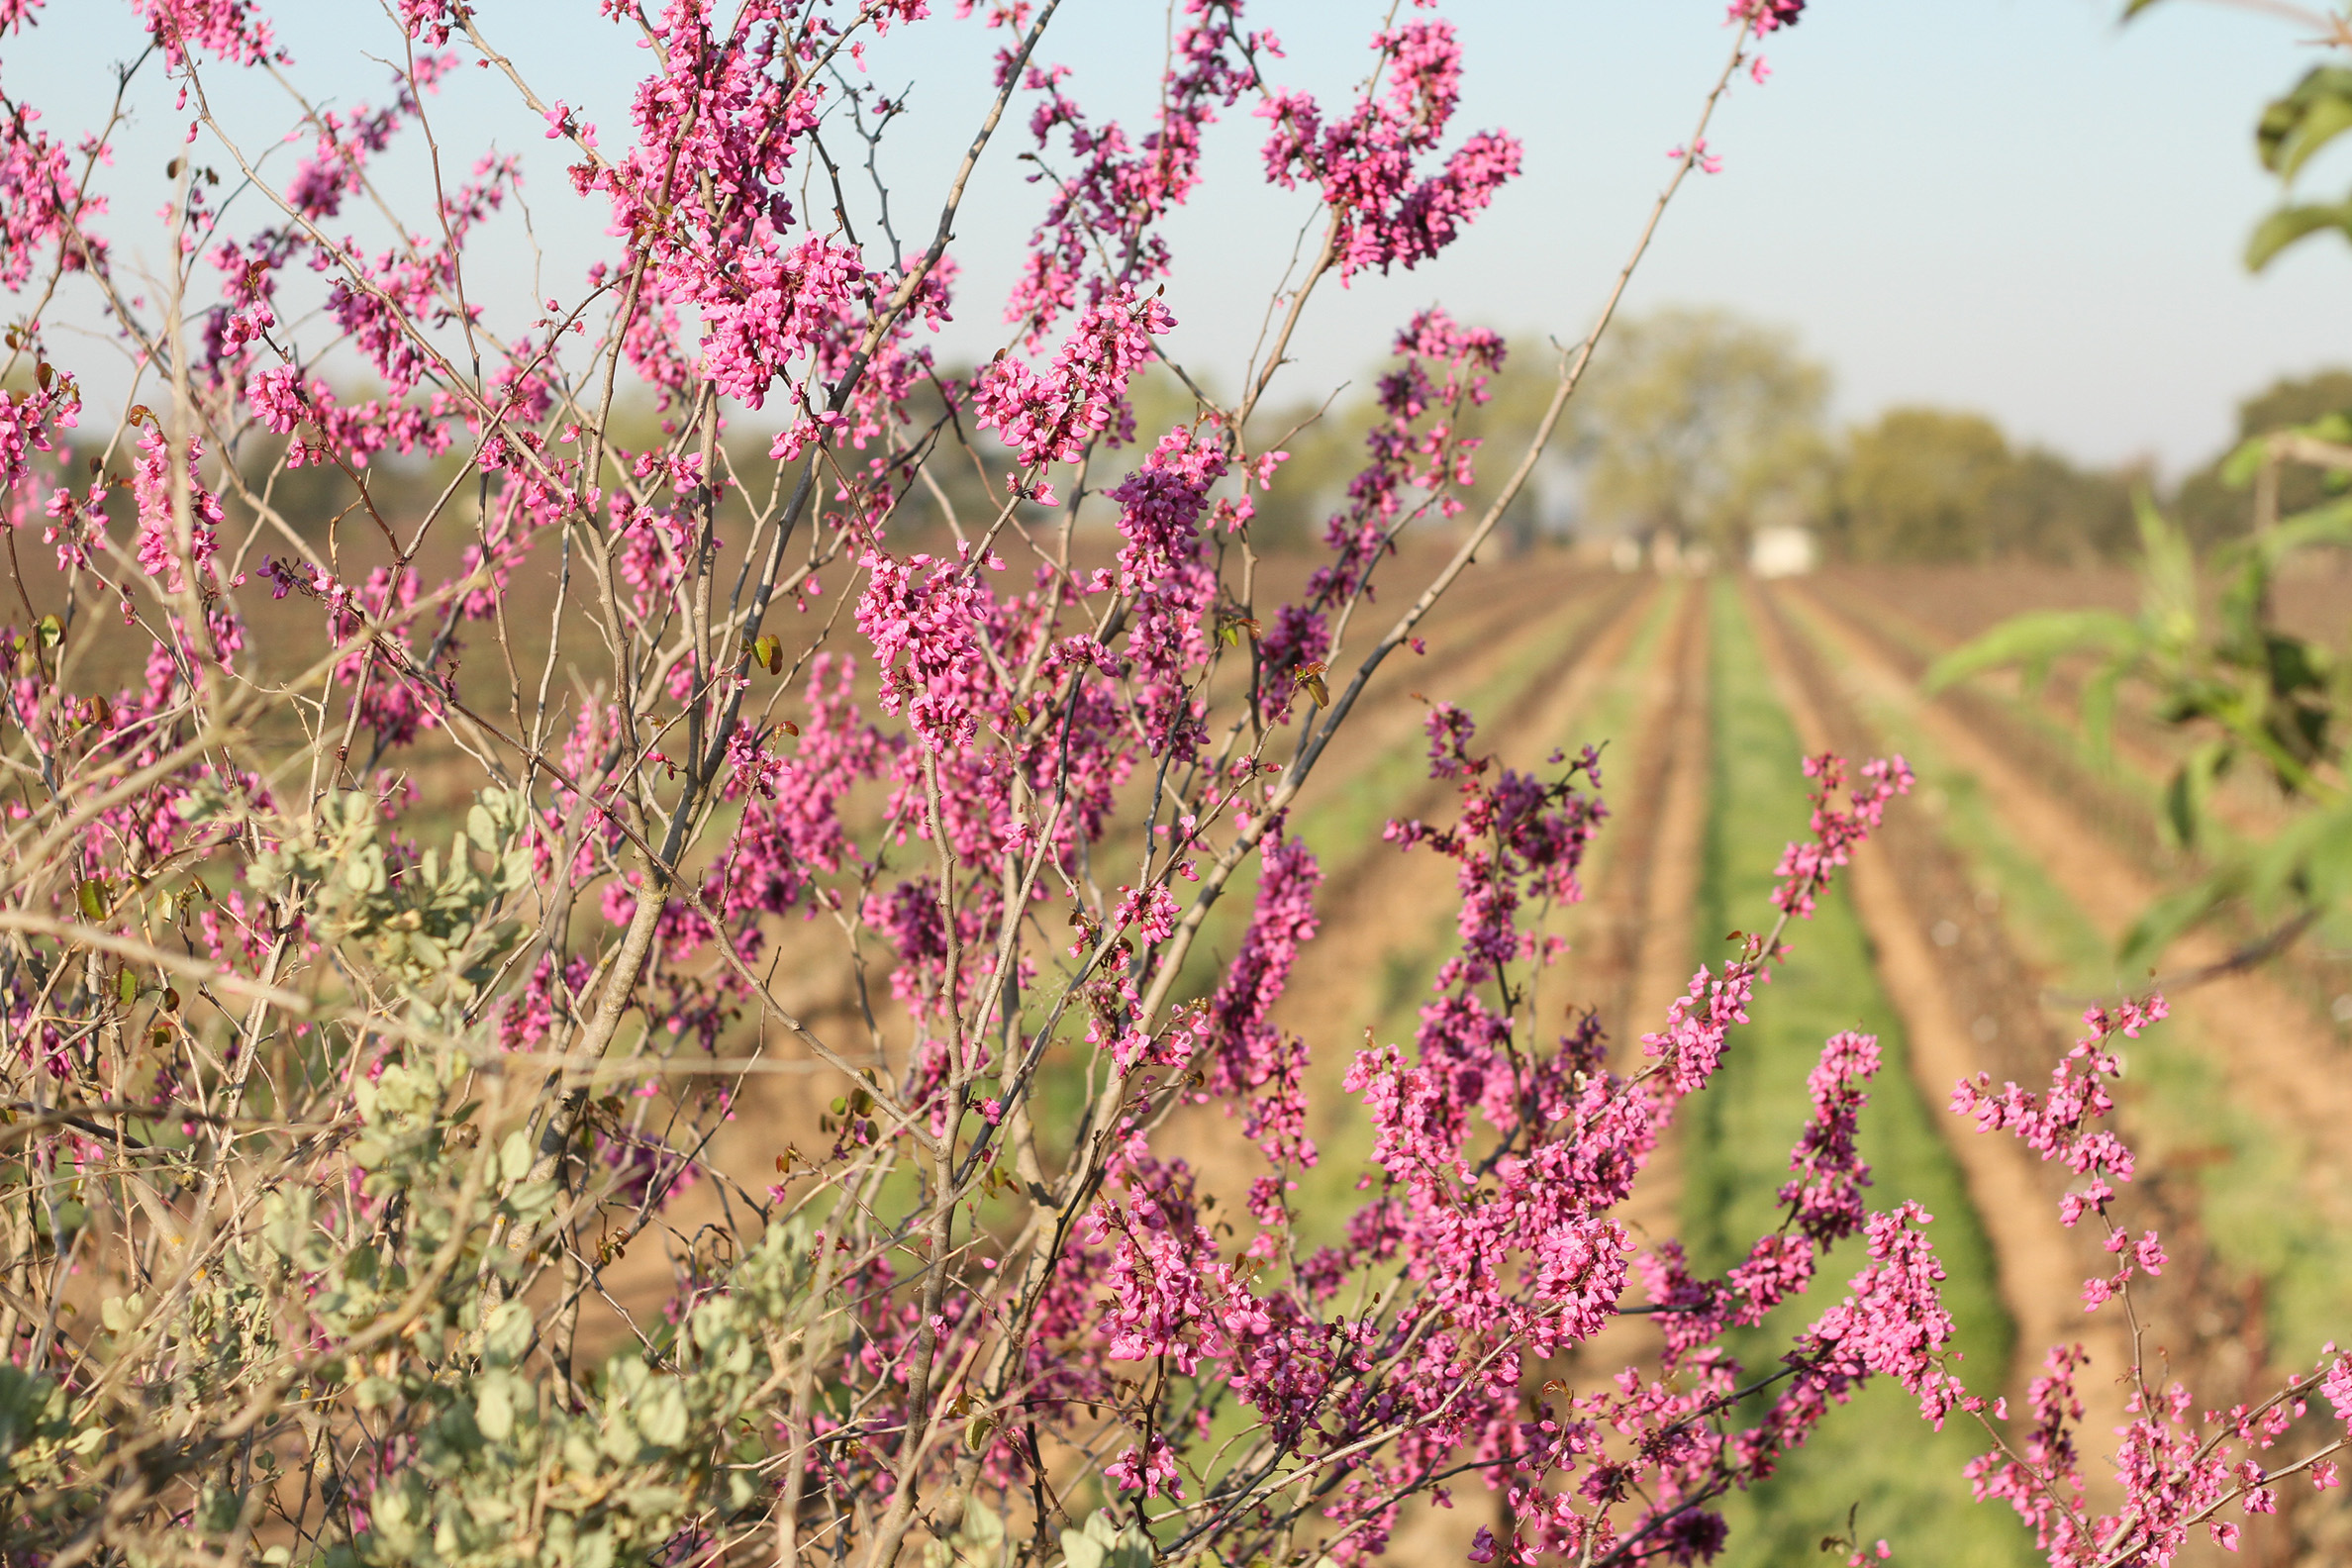 The pink blossom of a redbud tree in flower fil; the foreground, with rows of vines behind